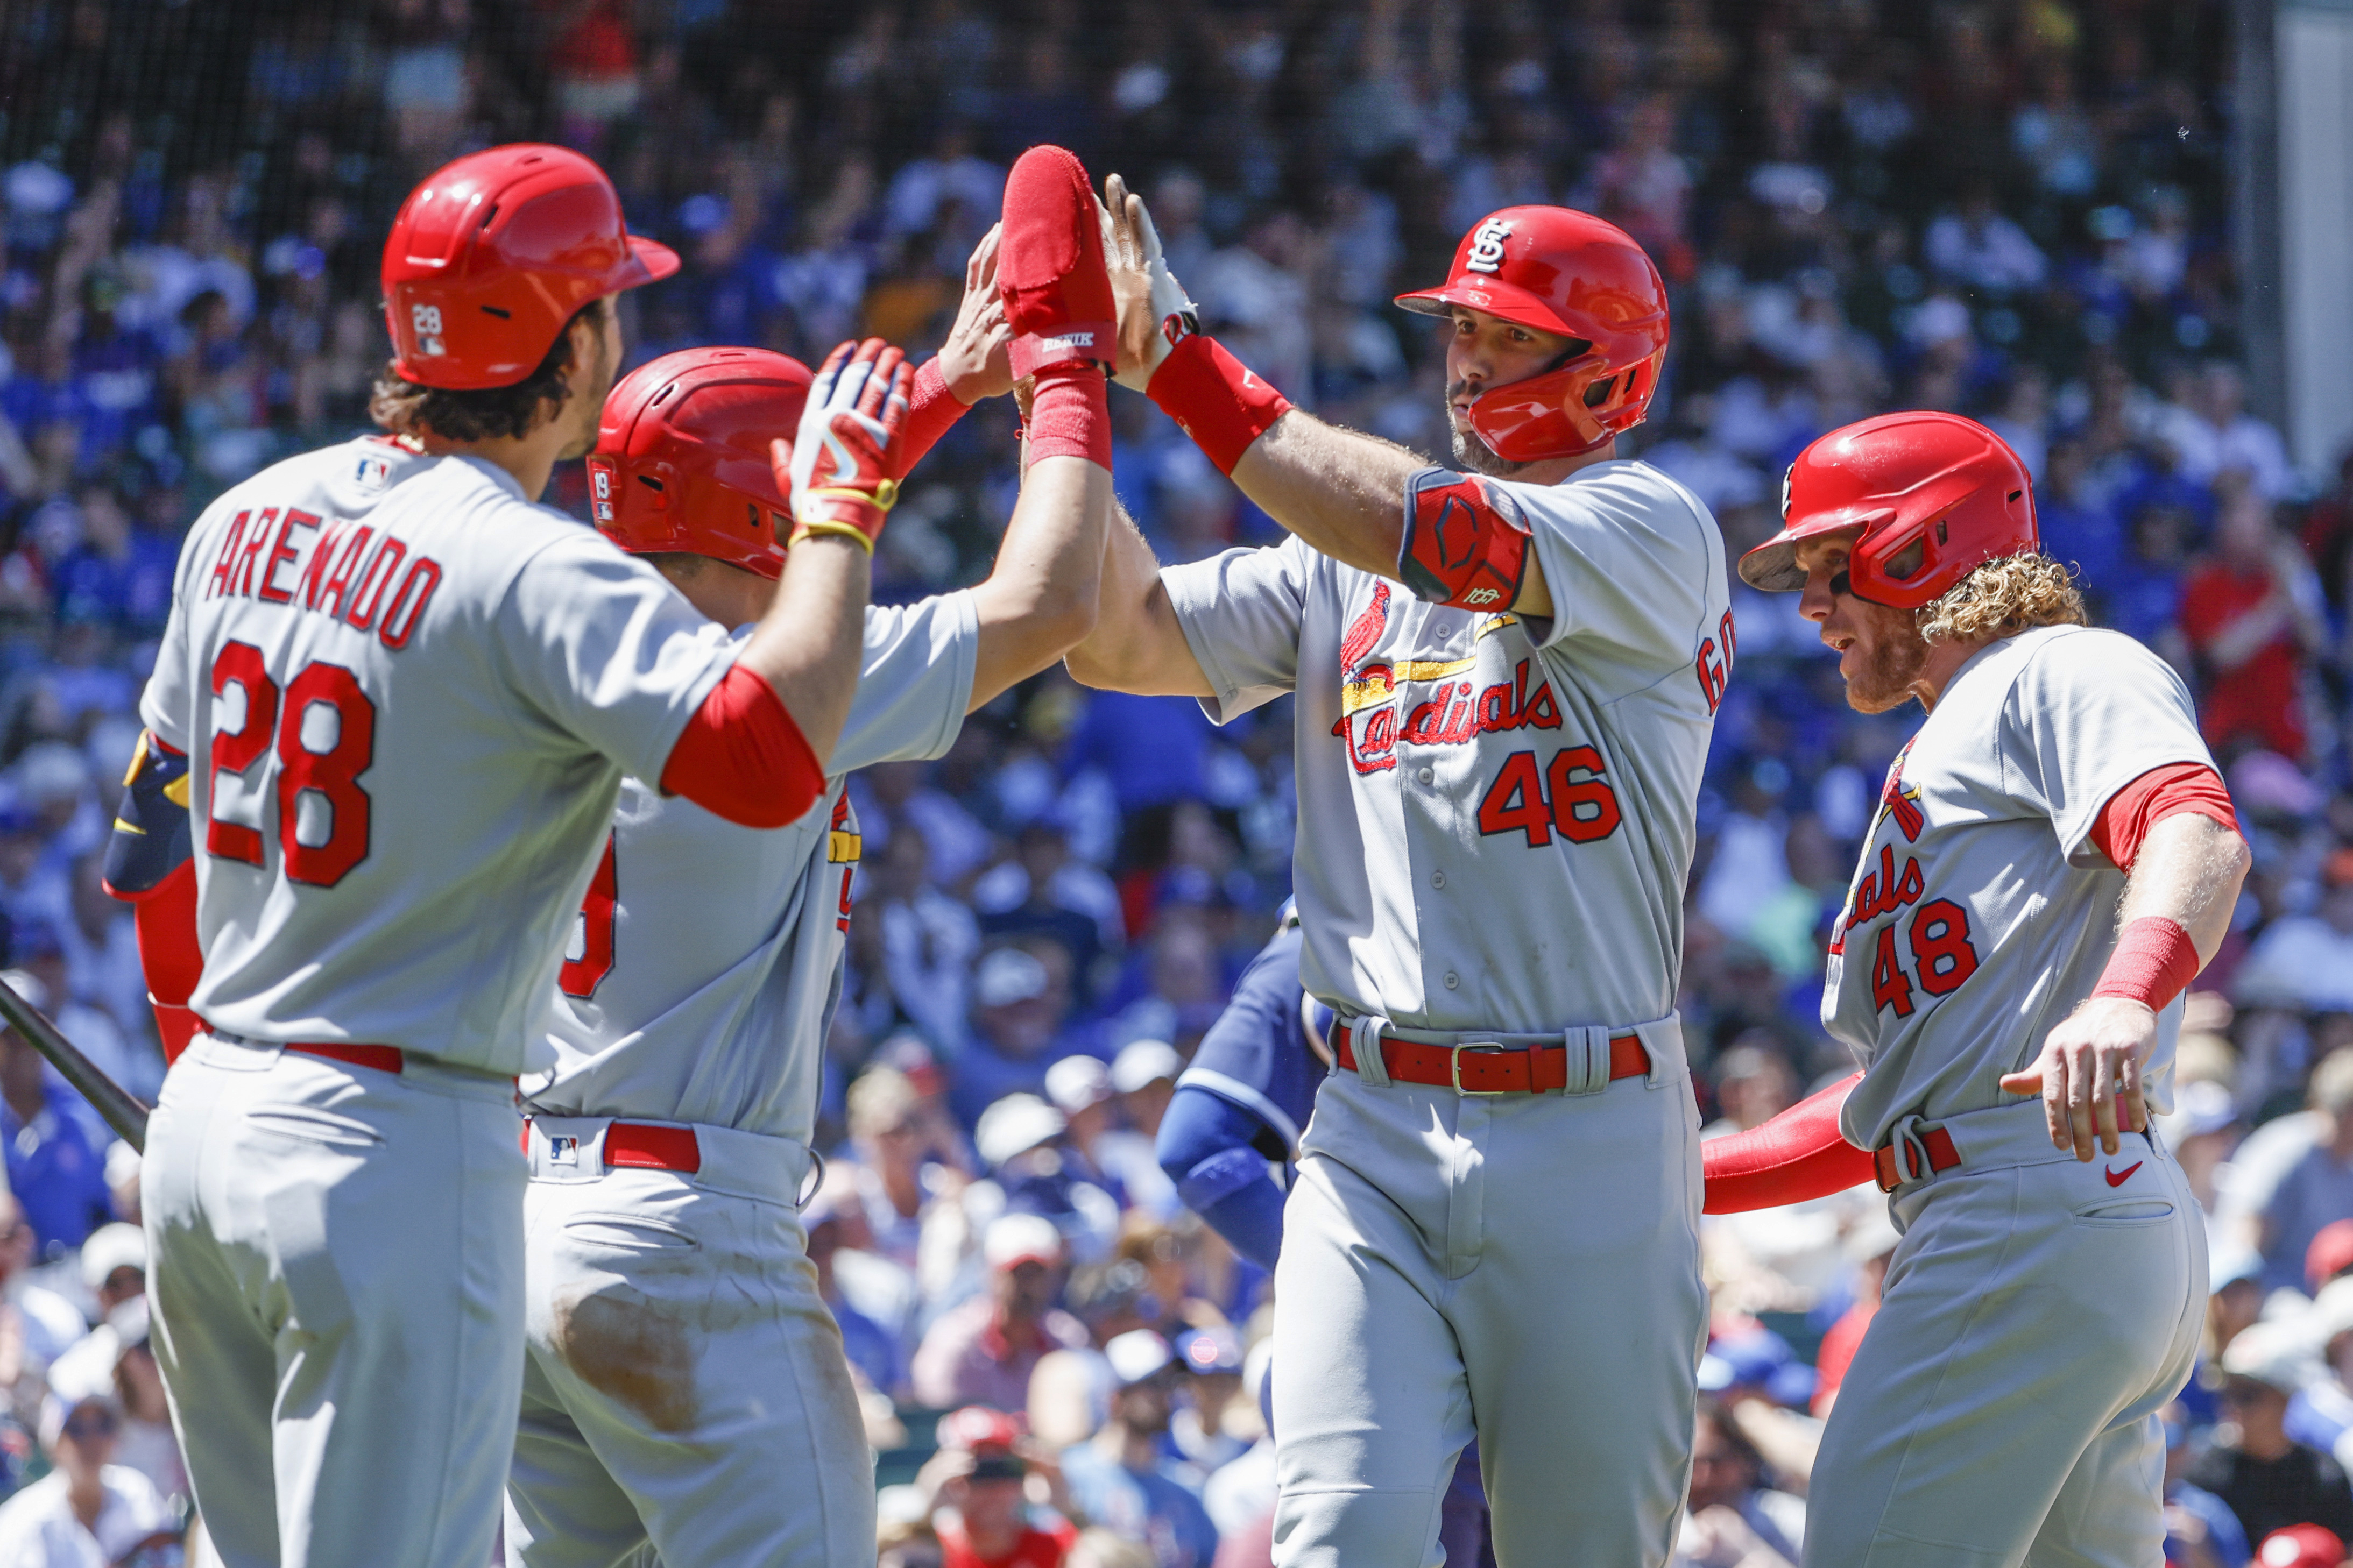 Birthday wish: Molina receives 10th All-Star honor but opts to